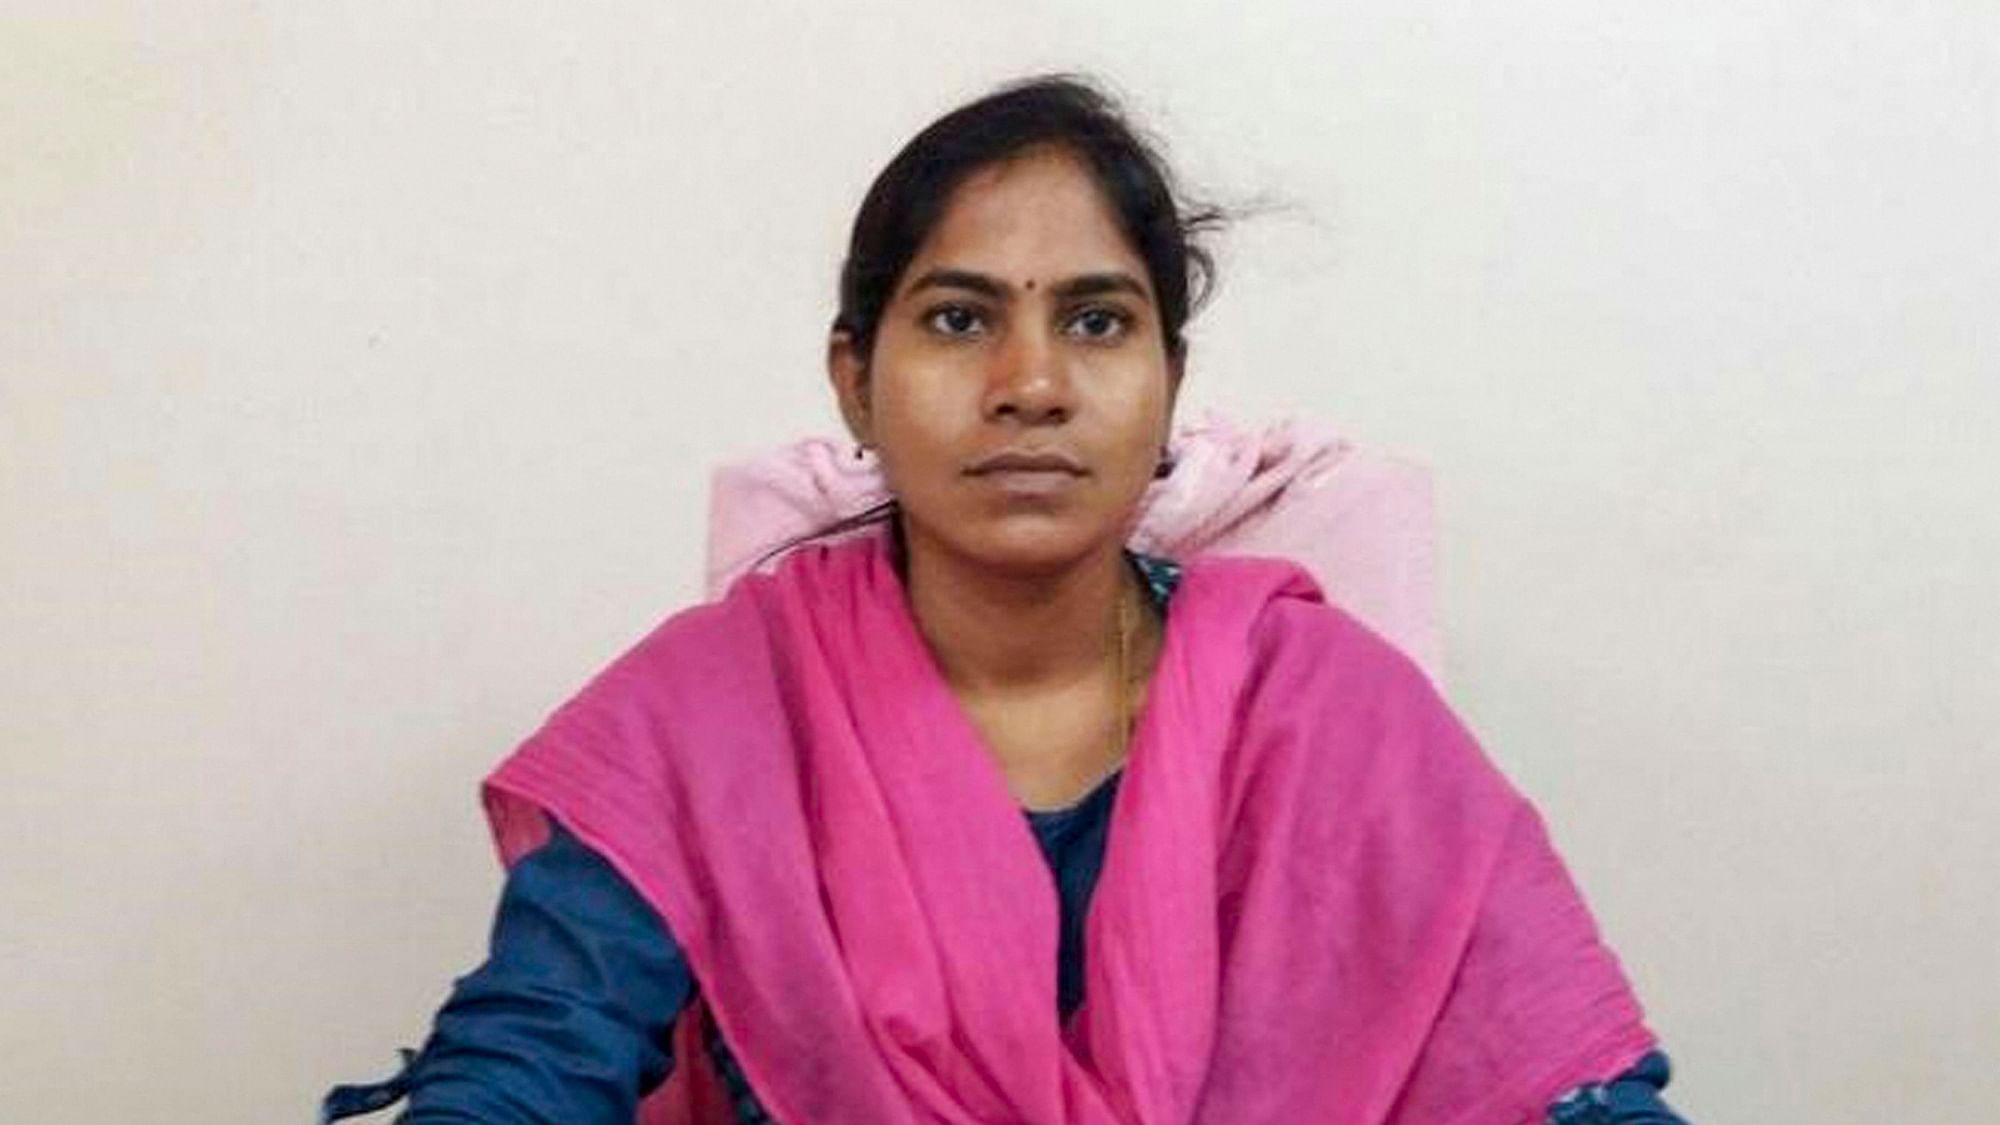 In a gruesome incident, a woman tehsildar in Telangana, Vijaya Reddy, was allegedly burnt alive by a man in her office at nearby Abdullapurmet in broad daylight on Monday, 4 November.